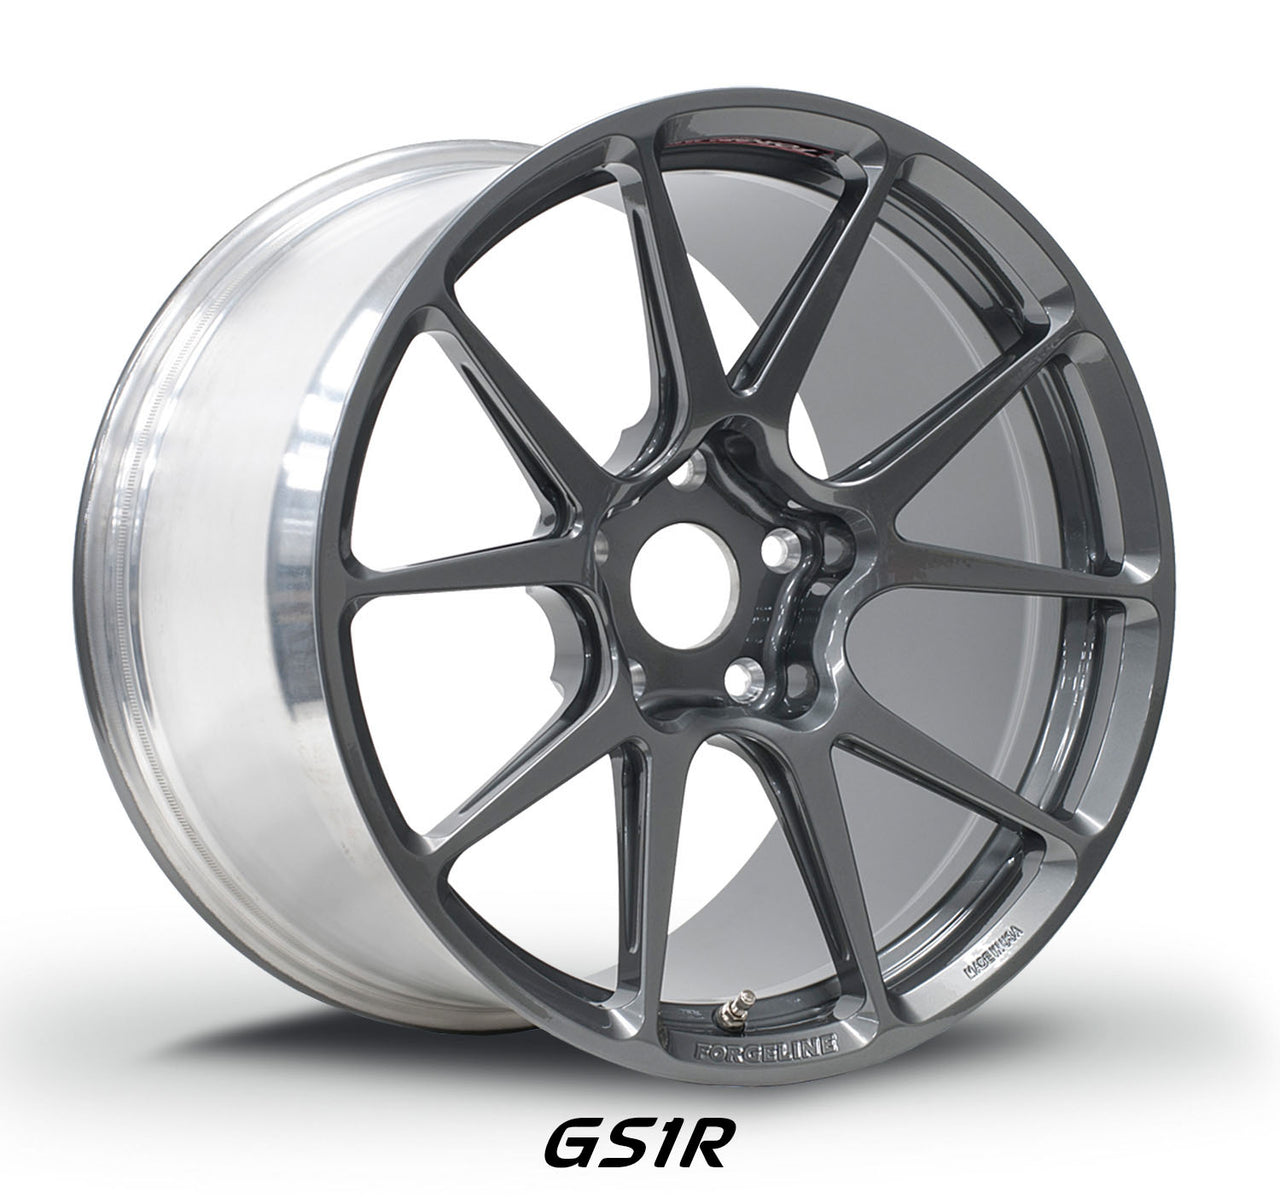 The iconic Forgeline Wheels GS1R is the best lightest racing wheel for the Chevy Camaro Z/28.